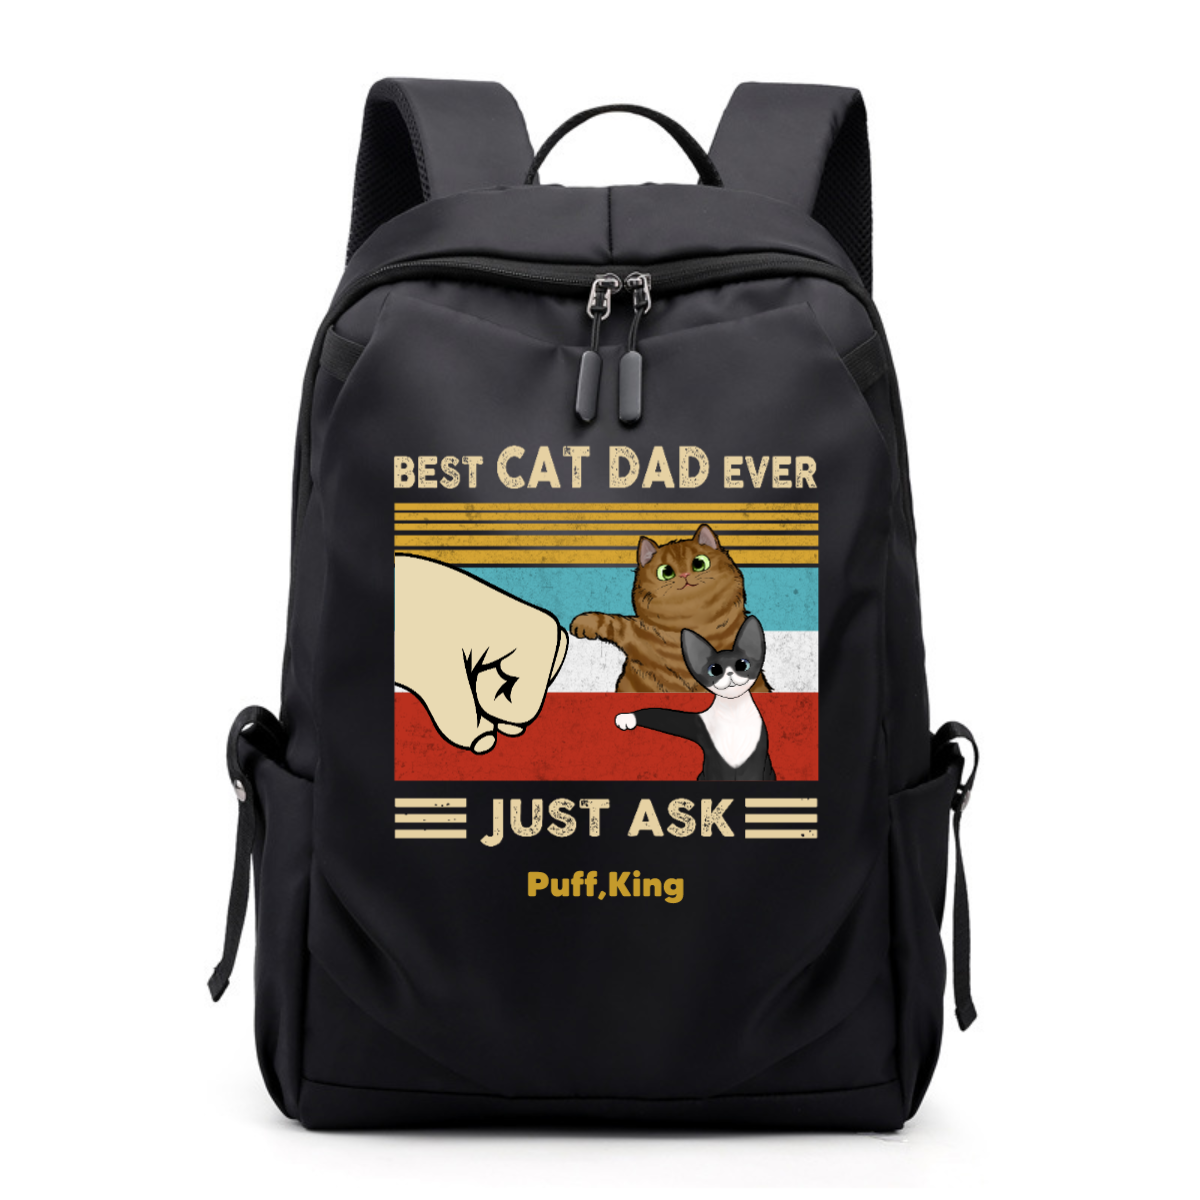 Best Cat Dad/Mom Ever Just Ask Personalized Backpack